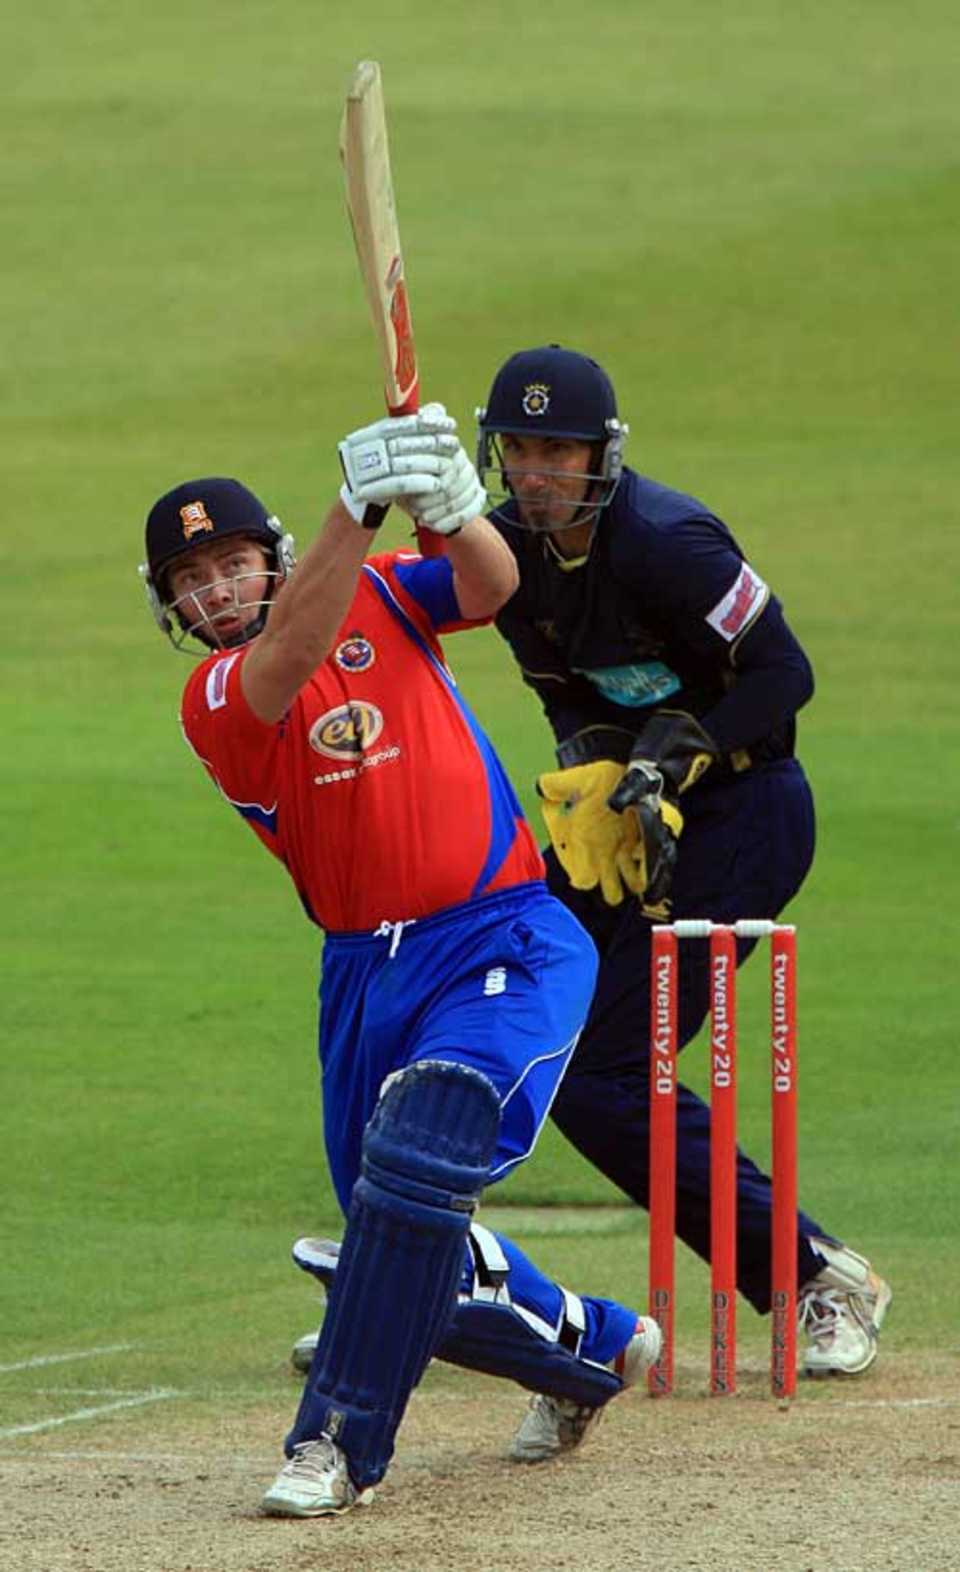 Graham Napier hits out, but only made 18 against Hampshire, Essex v Hampshire, Twenty20 Cup, Chelmsford, June 27, 2008